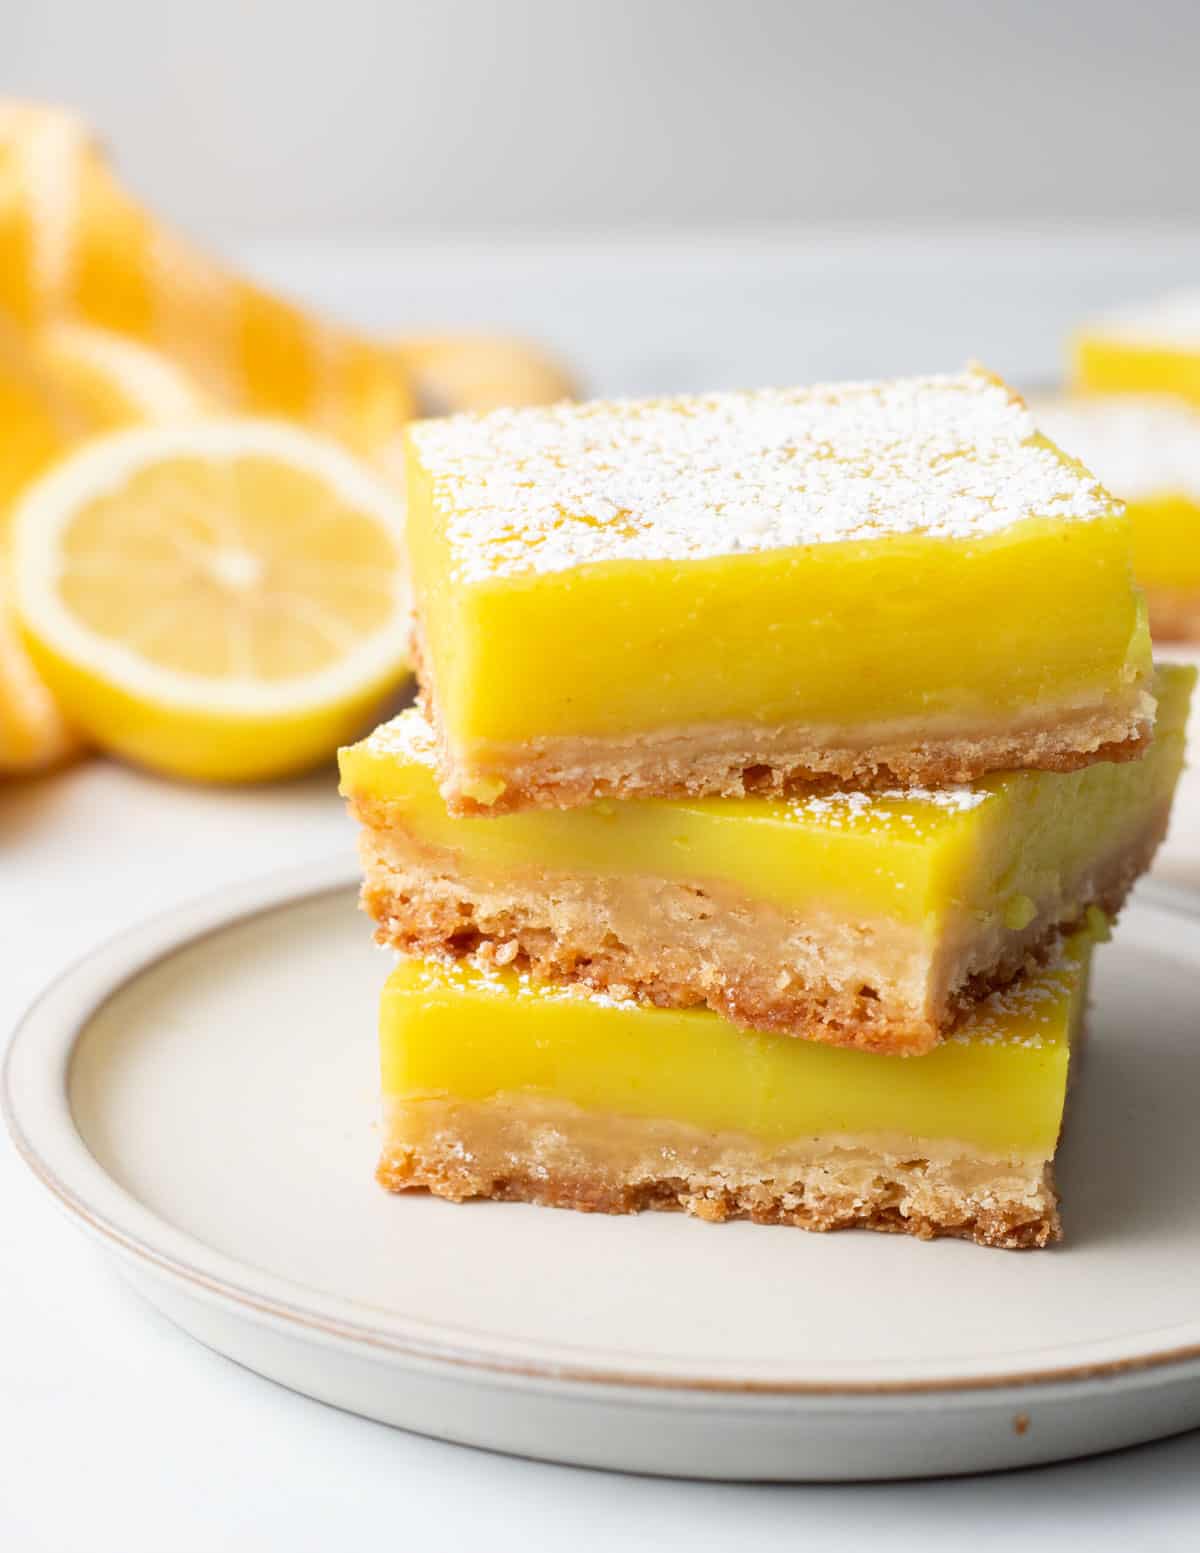 Stack of three lemon bars on a white plate.
